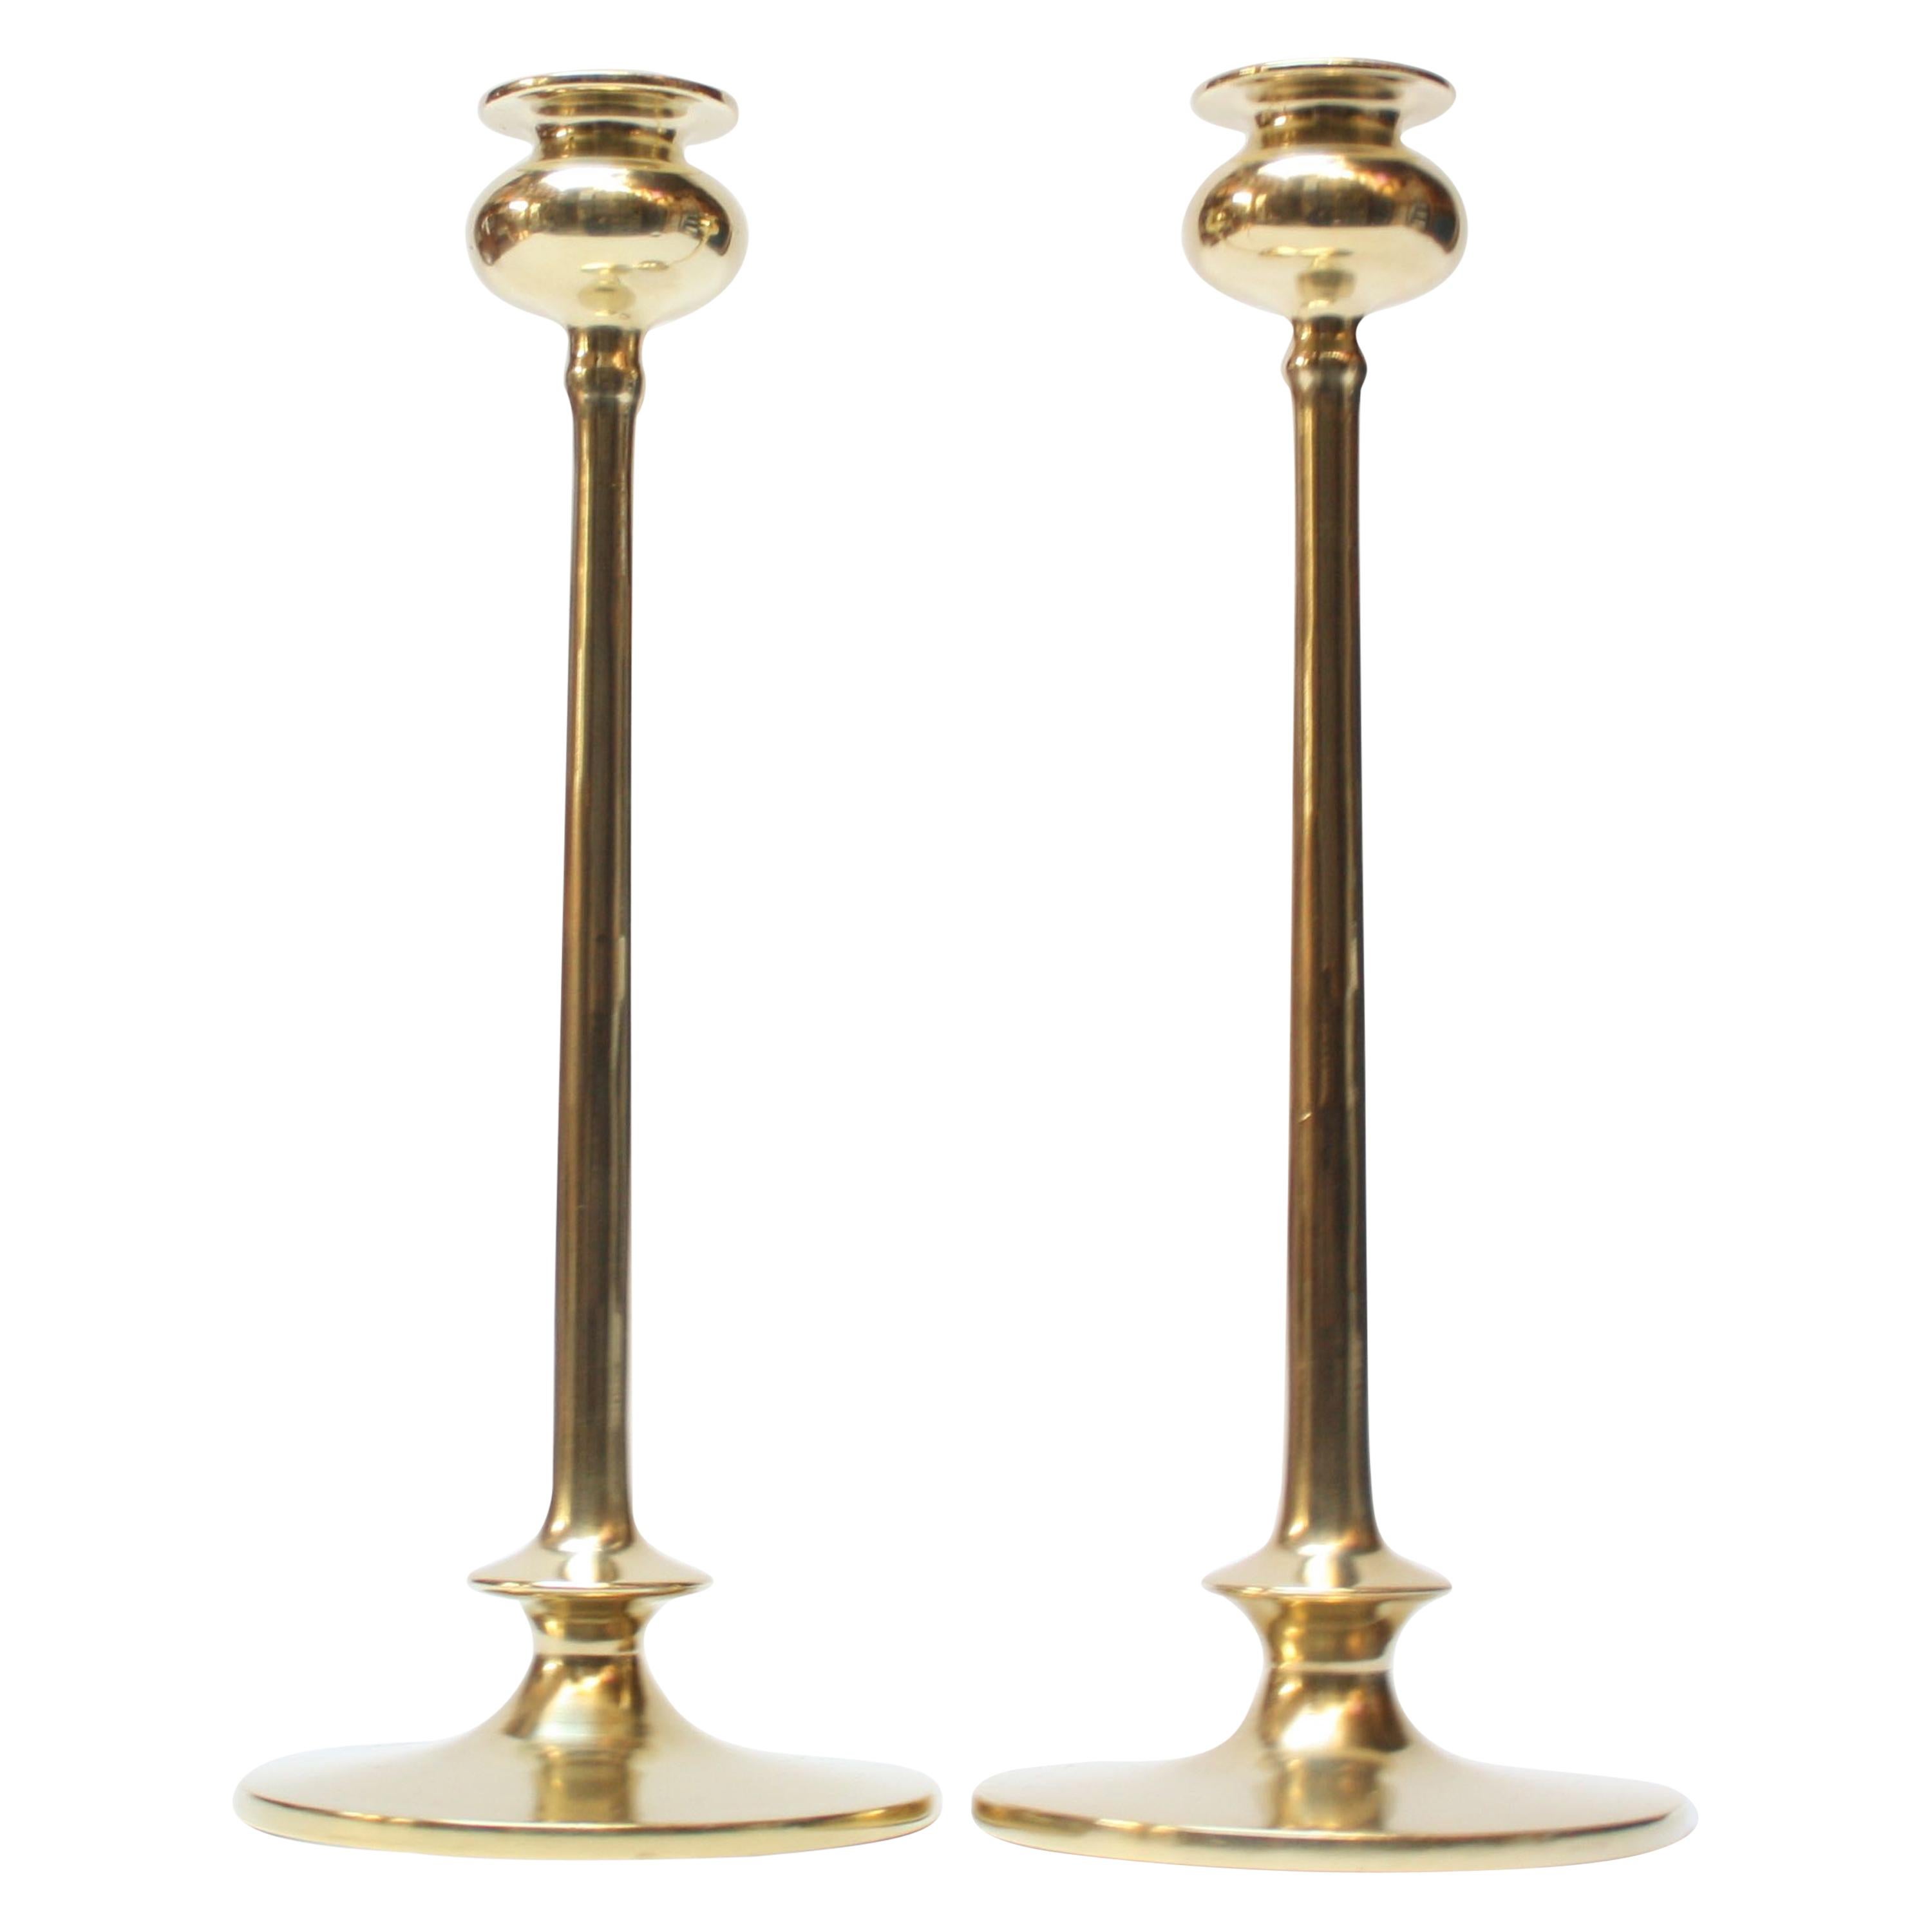 Pair of Mid-Century Modern Turned Brass Candlesticks after Jarvie